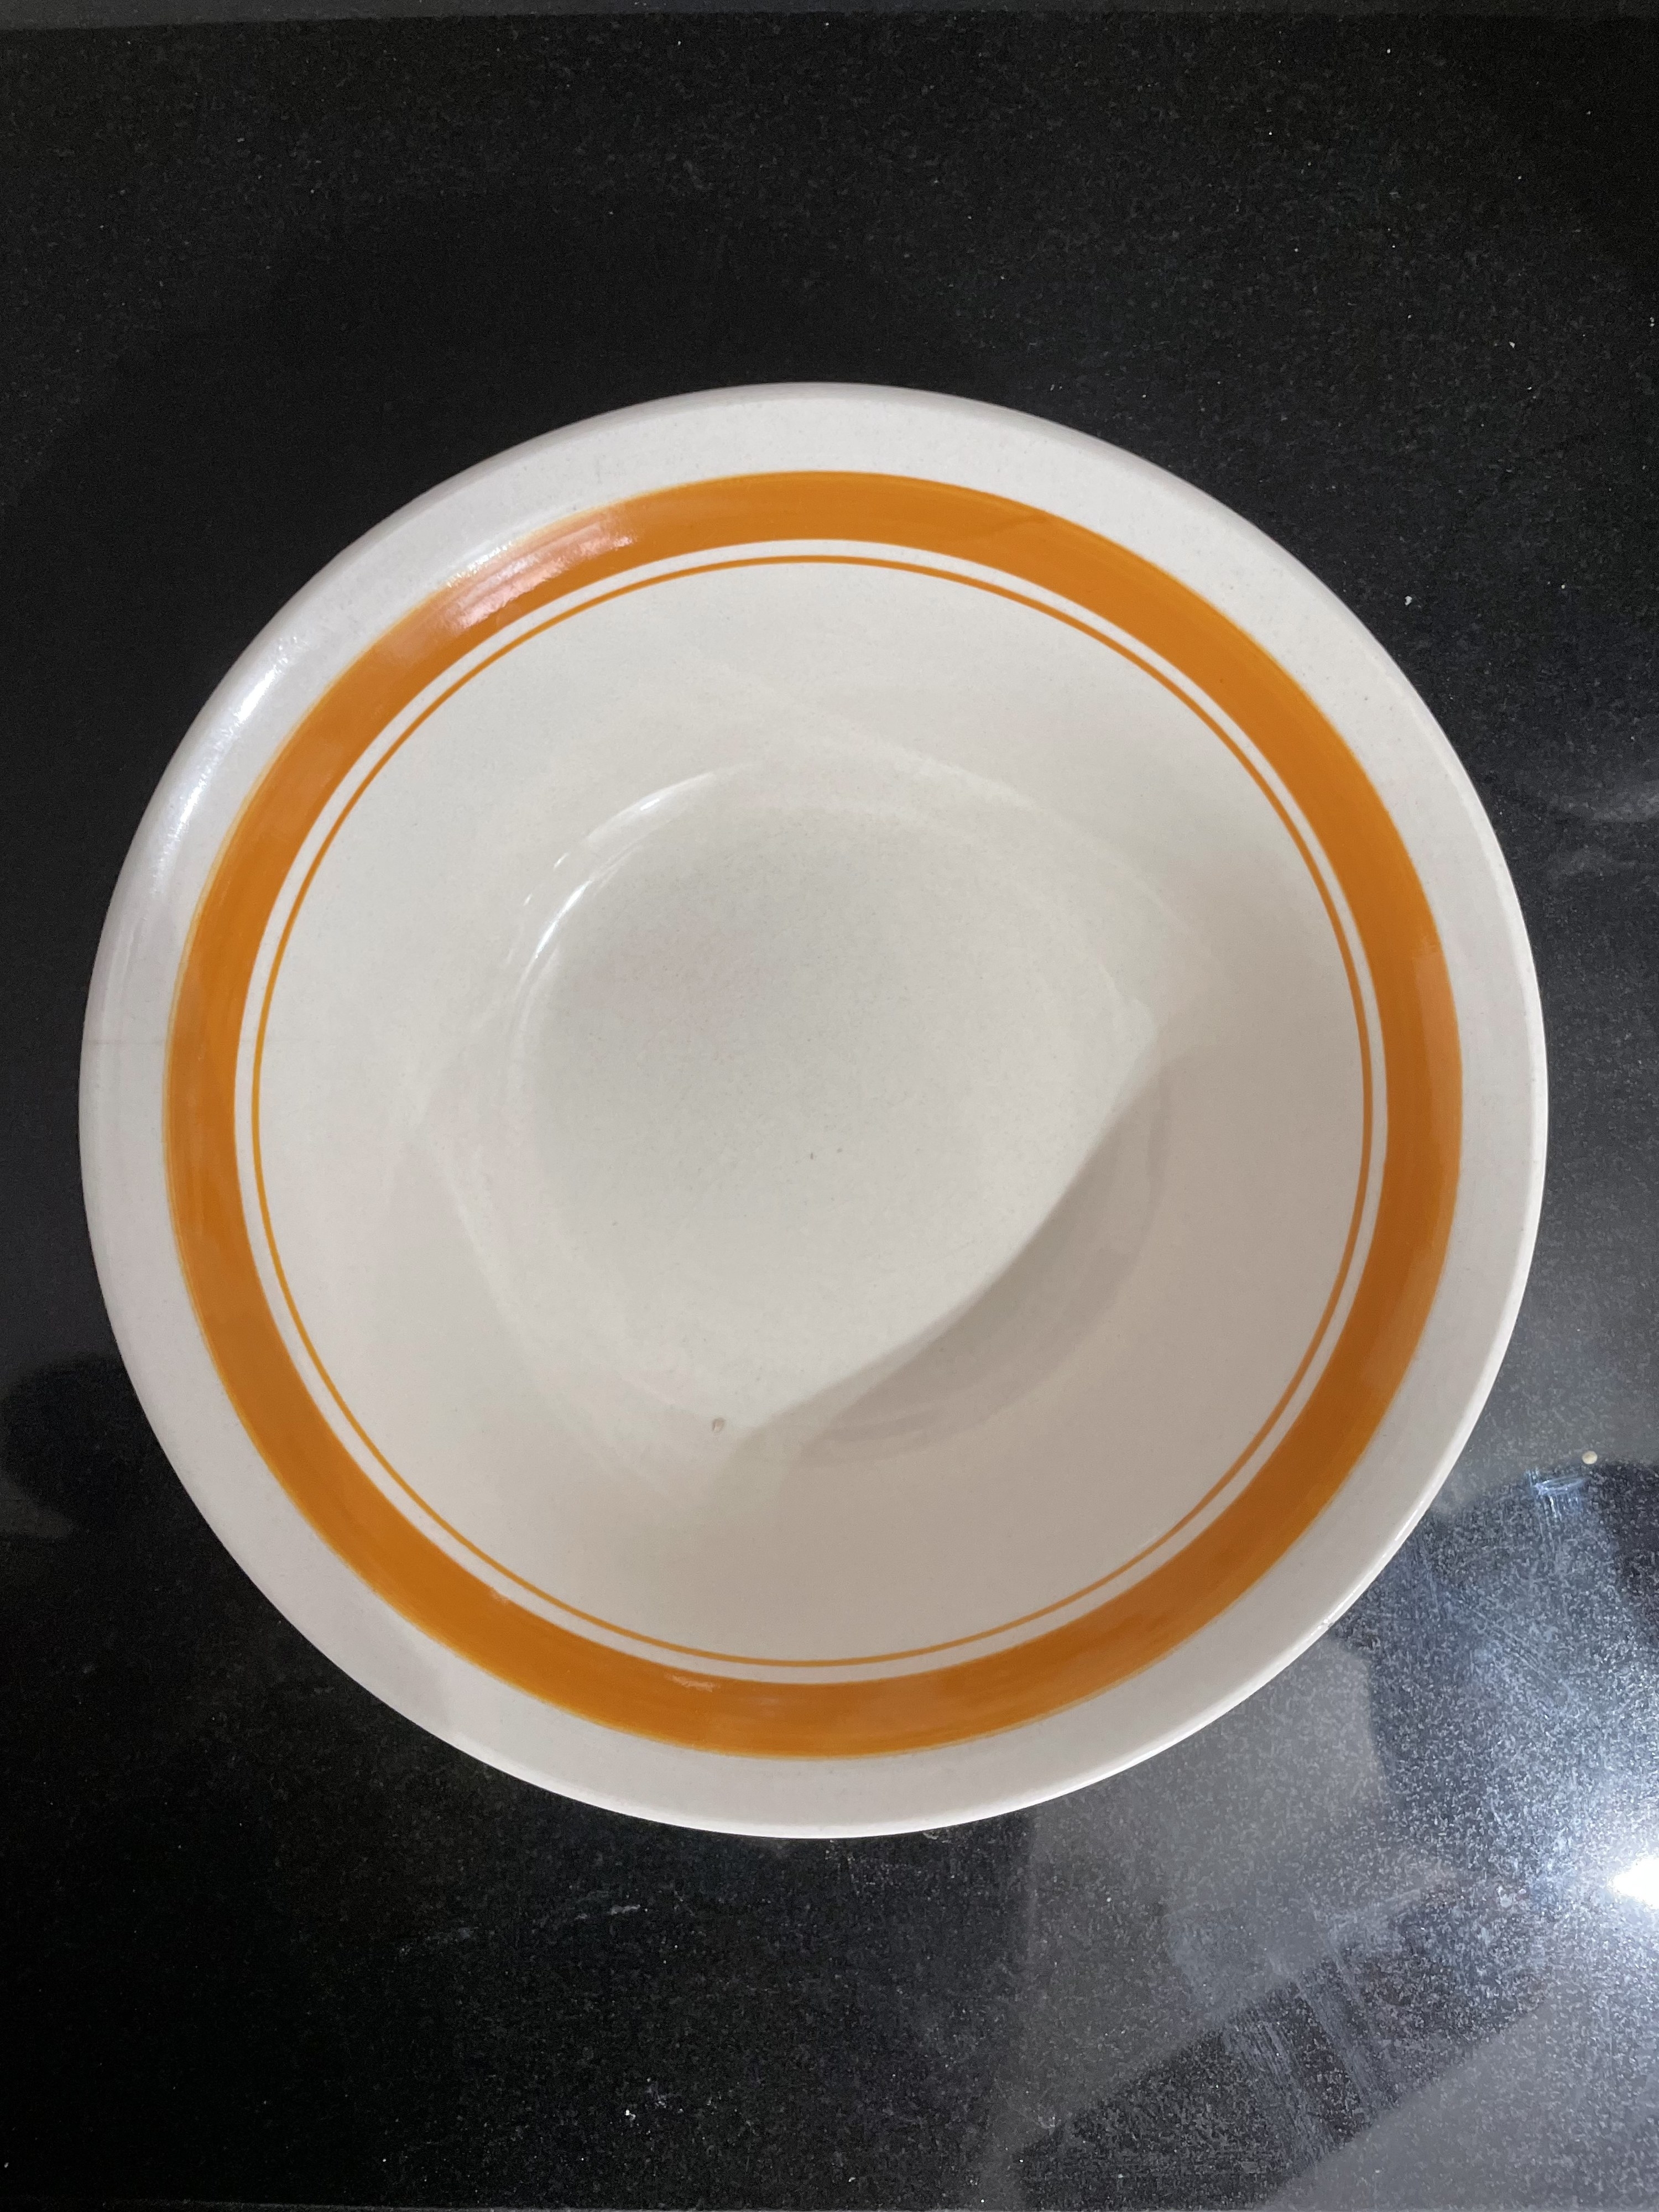 A Ceramic bowls with the colored ring inside